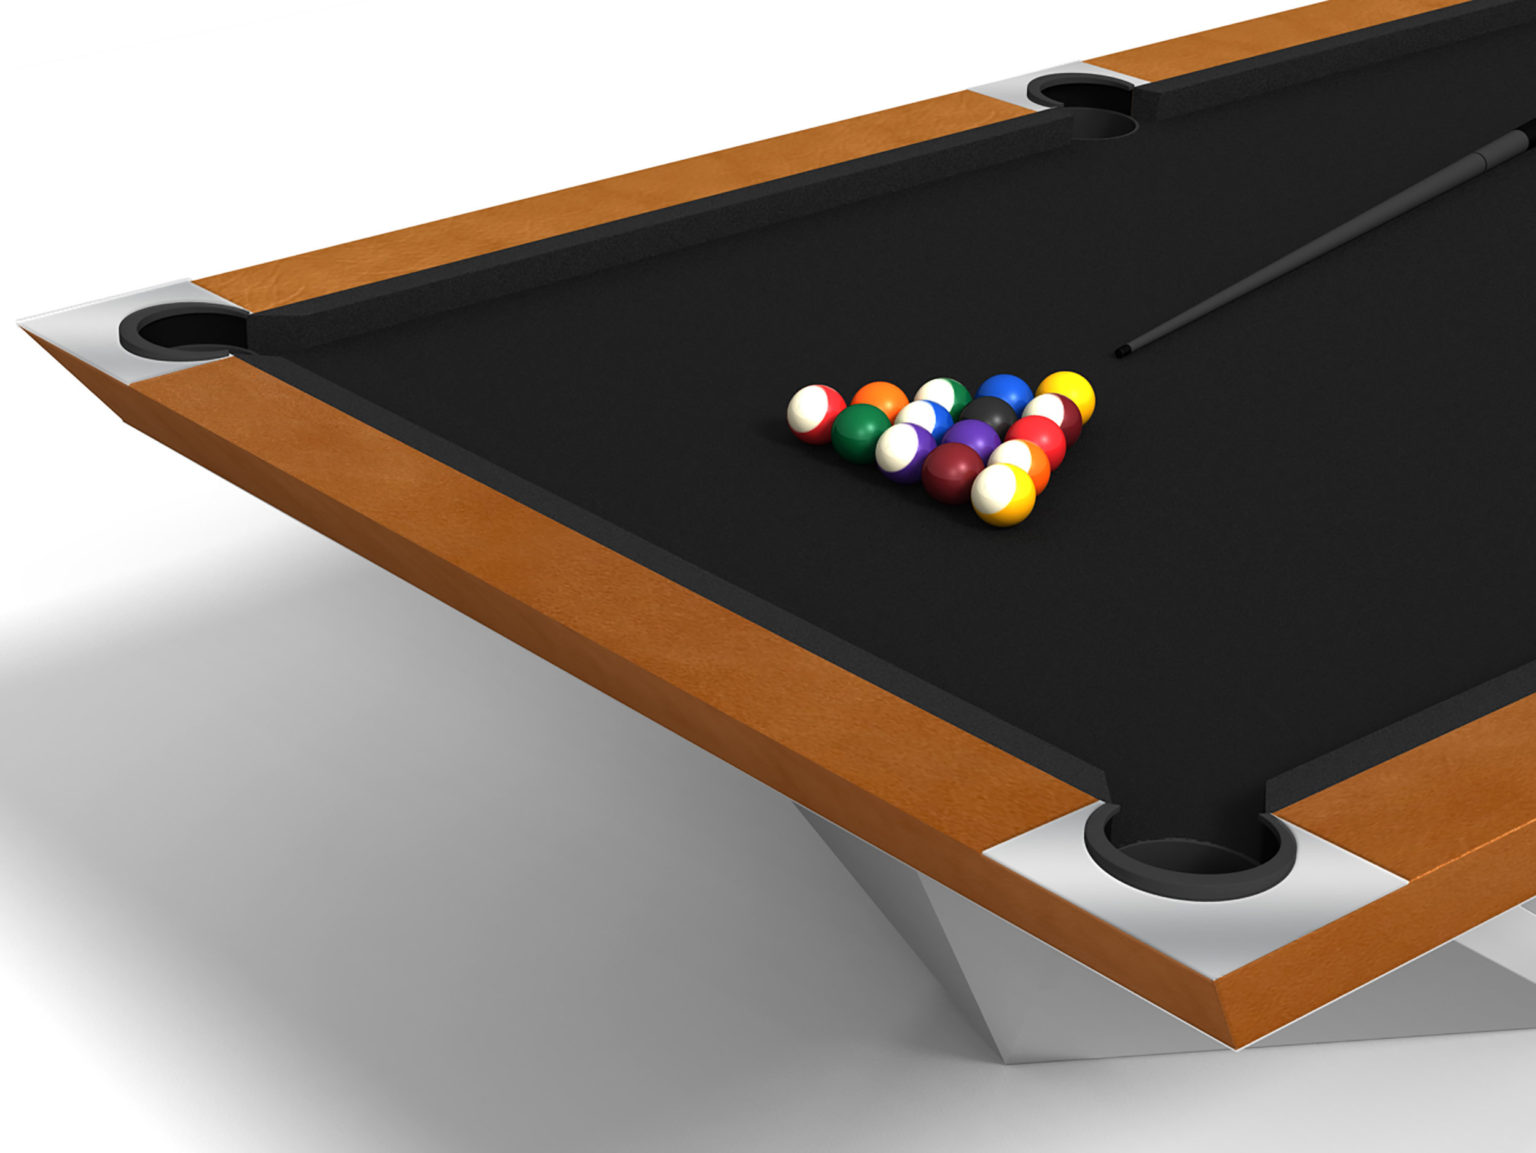 11 Ravens offers a Stealth line pool table for their customers and an exclusive model for Rolls-Royce customers.